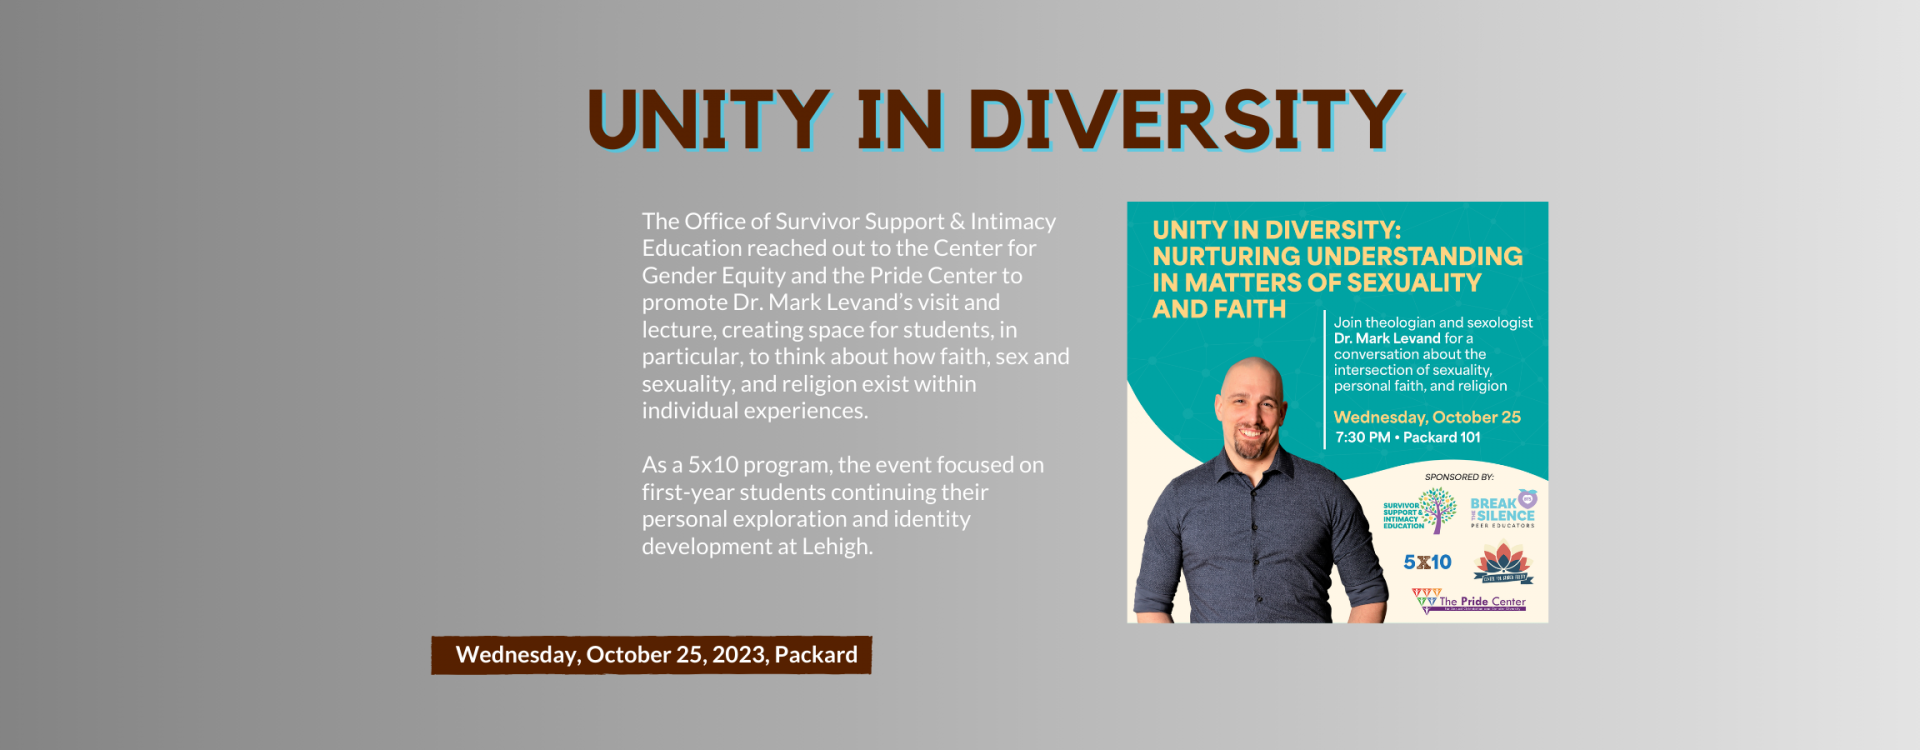 Unity in Diversity: The Office of Survivor Support & Intimacy Education reached out to the Center for Gender Equity and the Pride Center to promote Dr. Mark Levand’s visit and lecture, creating space for students, in particular, to think about how faith, sex and sexuality, and religion exist within individual experiences.  As a 5x10 program, the event focused on first-year students continuing their personal exploration and identity development at Lehigh. 